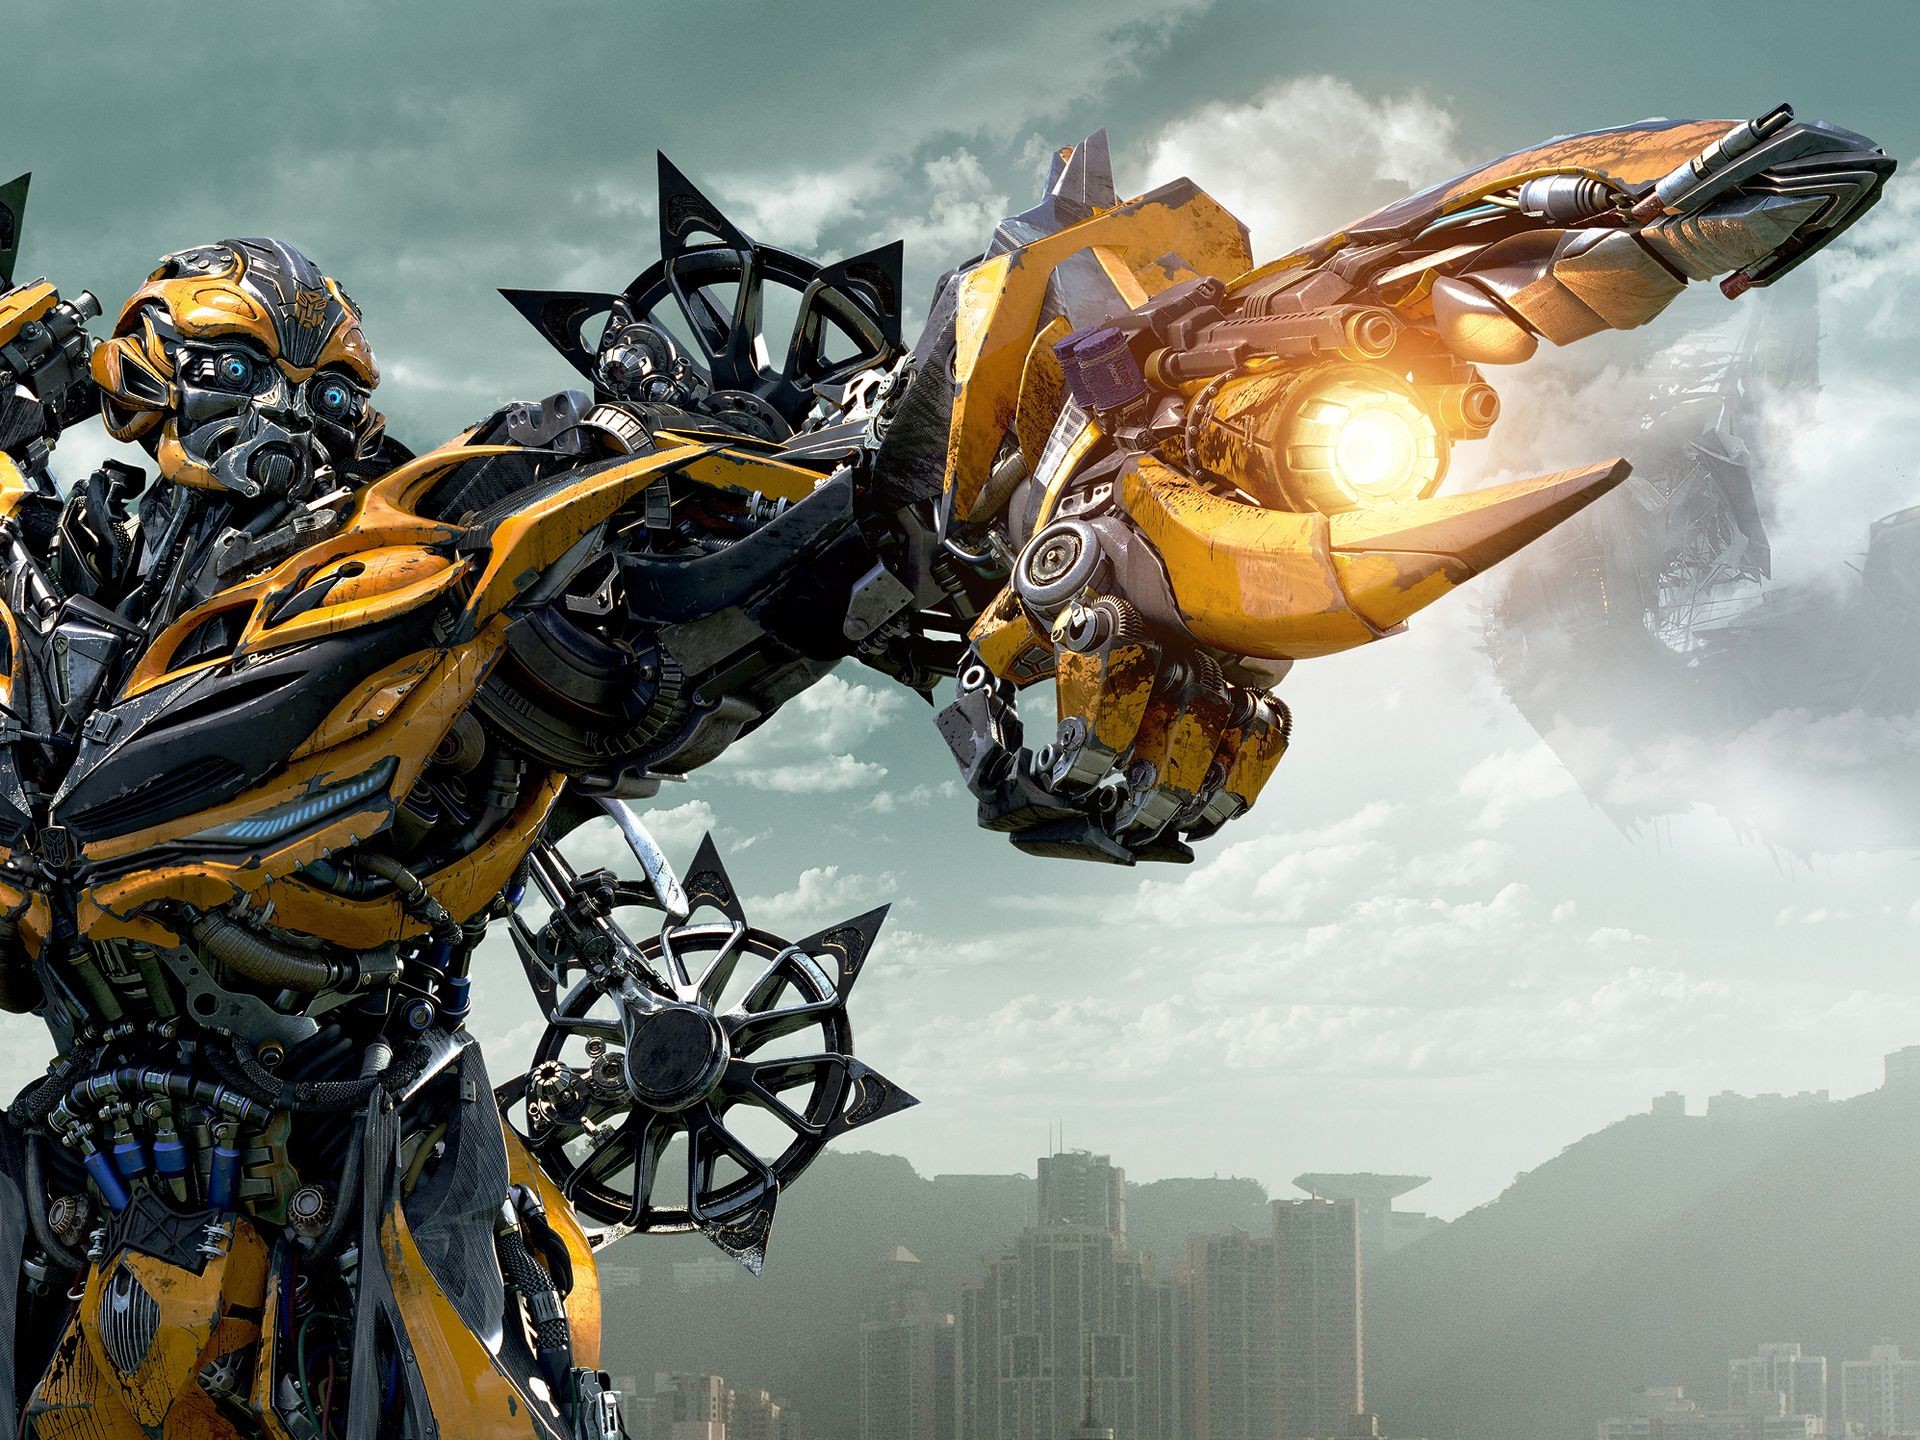 Bumblebee from Paramount Pictures' Transformers: Age of Extinction (2014)